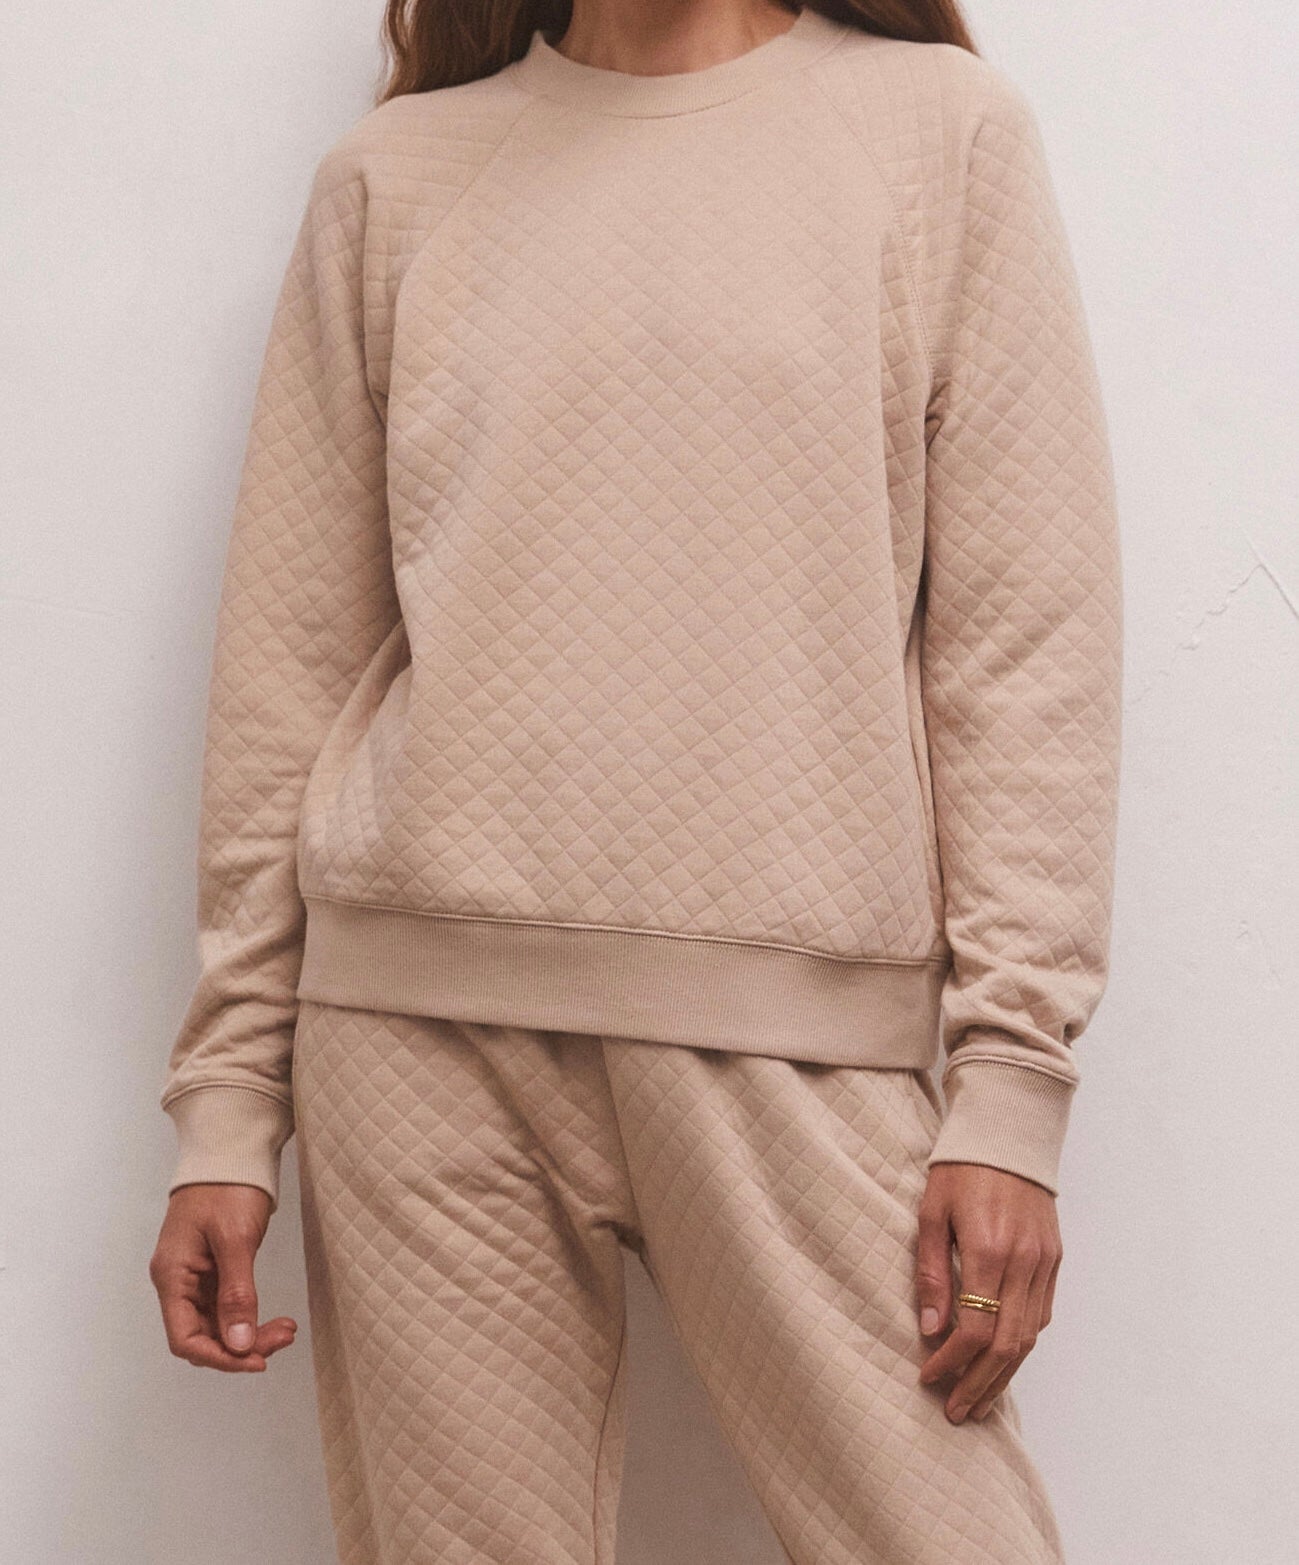    Quilted Sweatshirt Apex Ethical Boutique